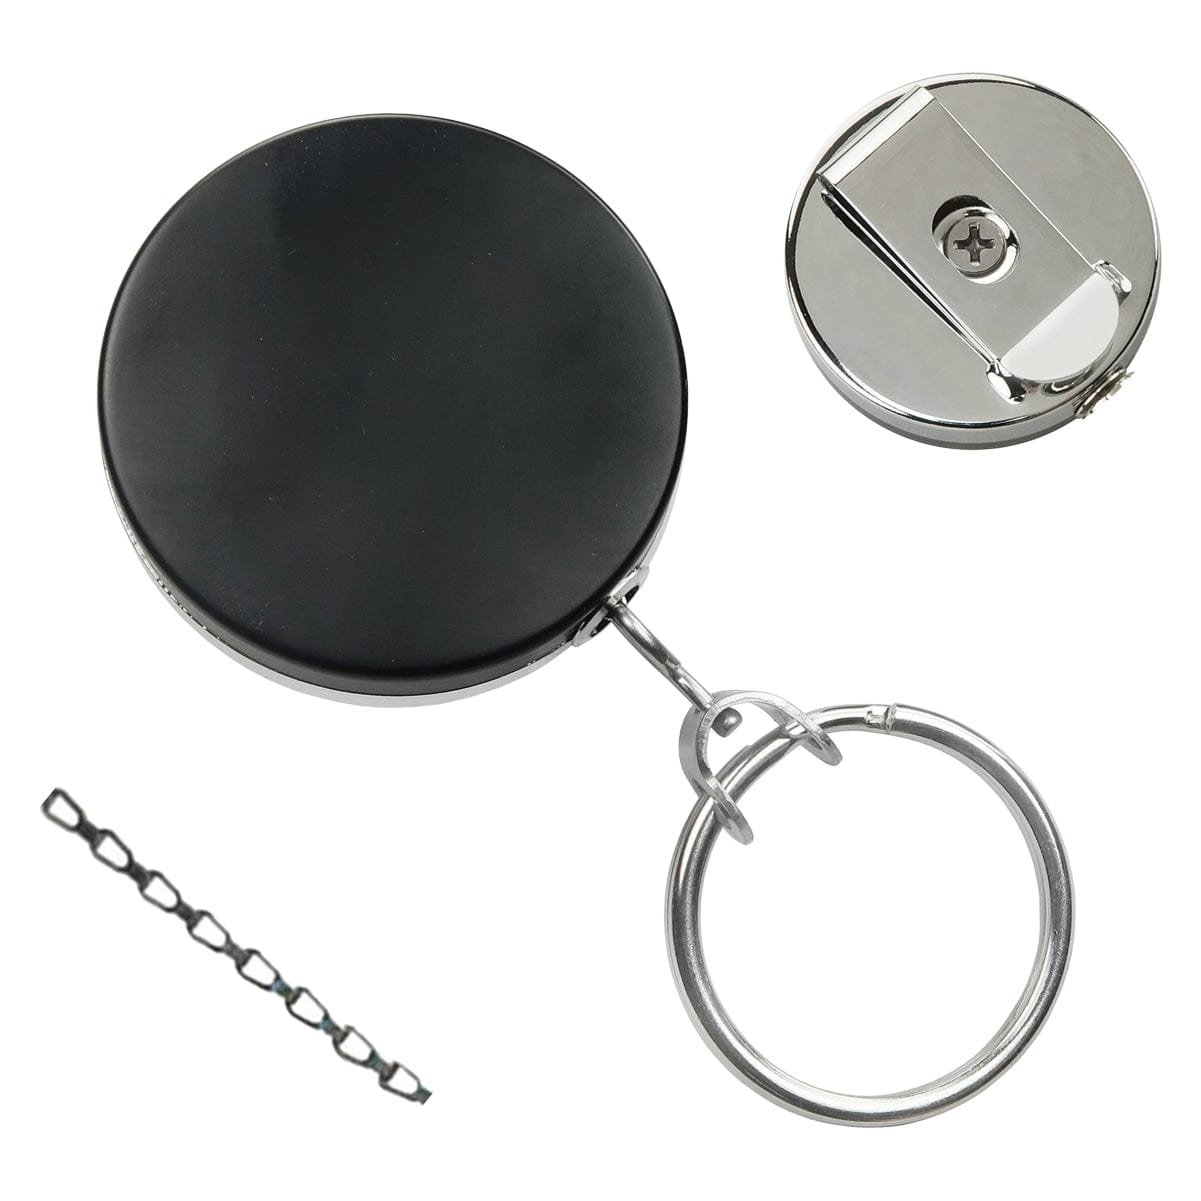 Heavy Duty Badge Reel with Chain & Belt Clip - Strong All Metal Retractable Keychain for Keys and Badges (2120-3325)